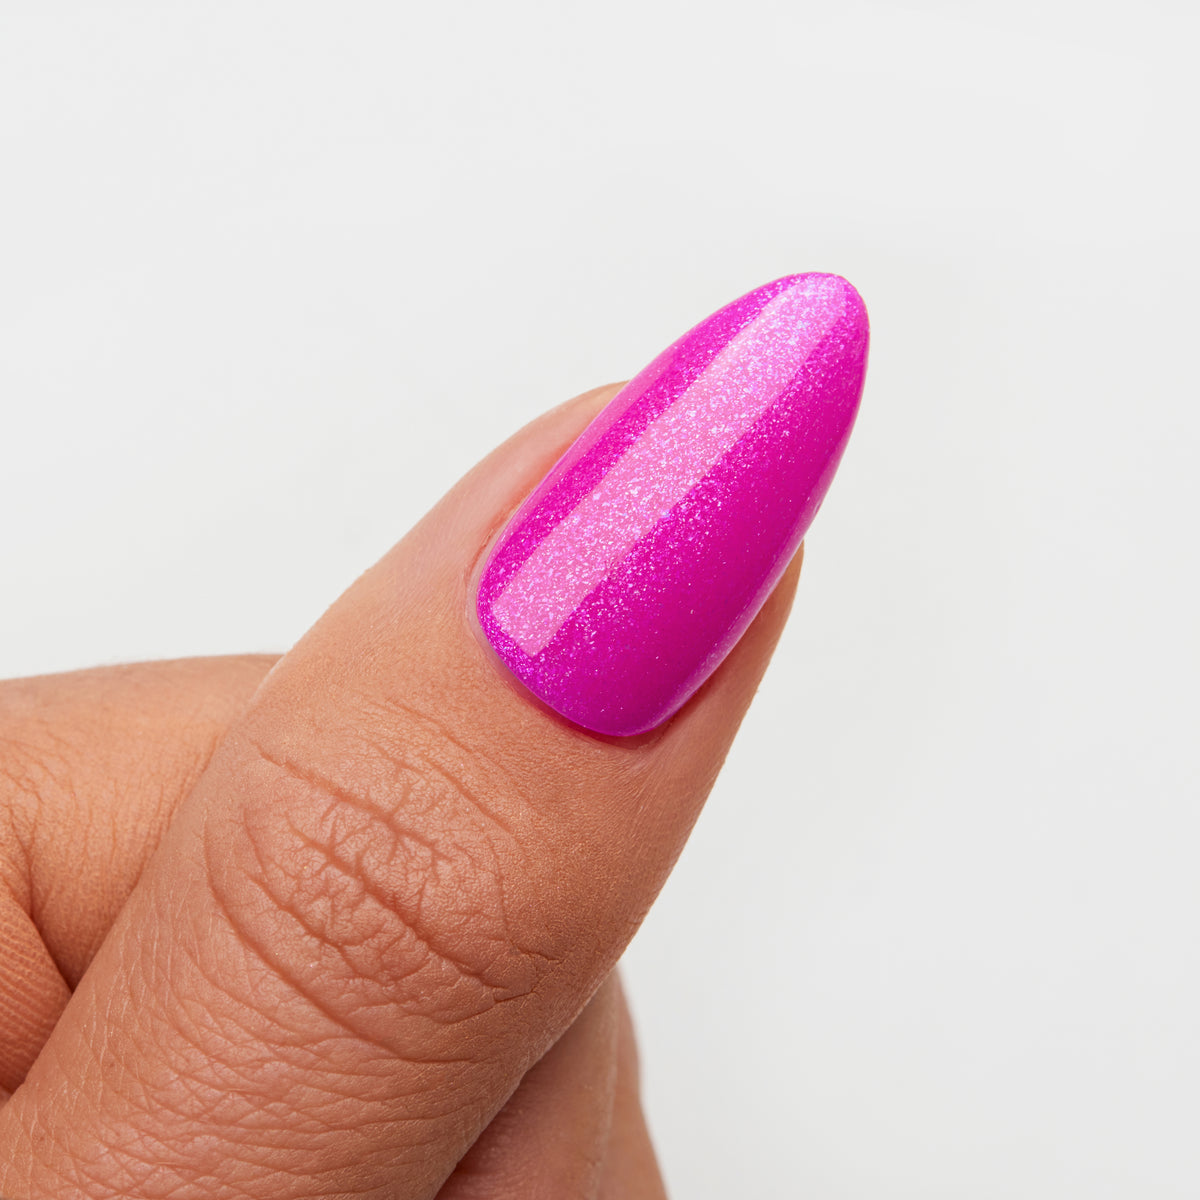 Gelous Back to the Fuchsia gel nail polish swatch - photographed in New Zealand